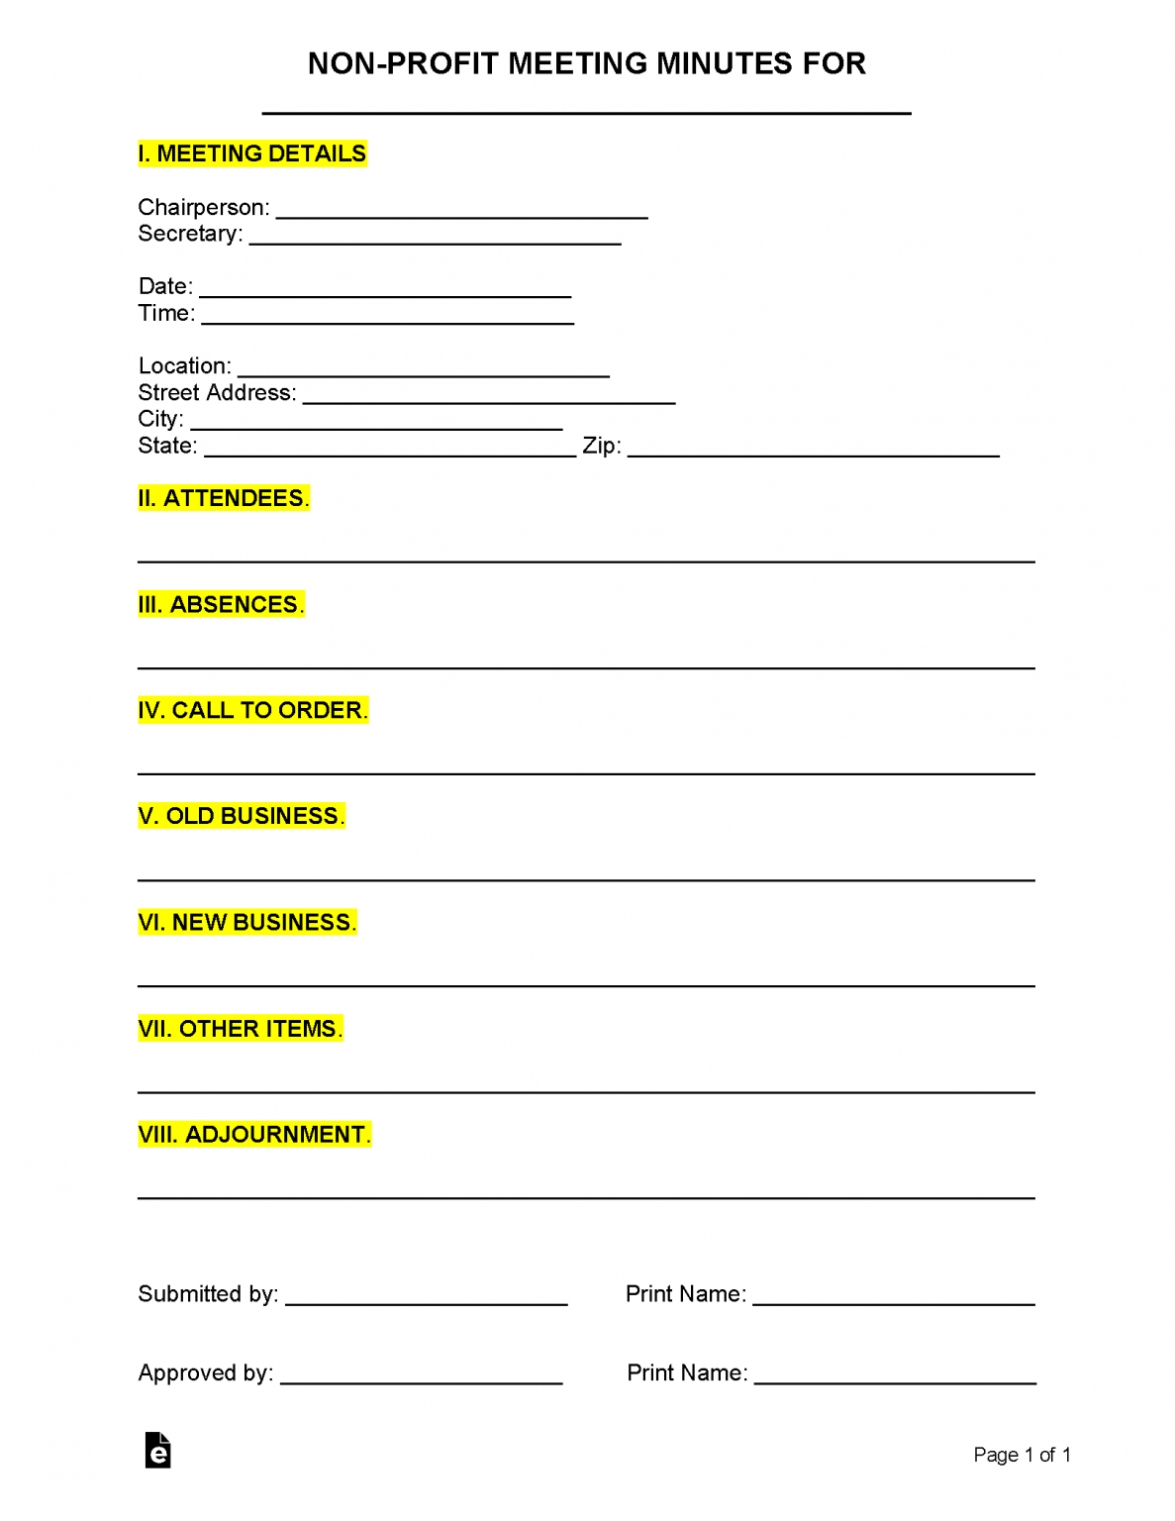 Non Profit Meeting Minutes Template | Sample – Eforms Intended For Committee Meeting Minutes Template